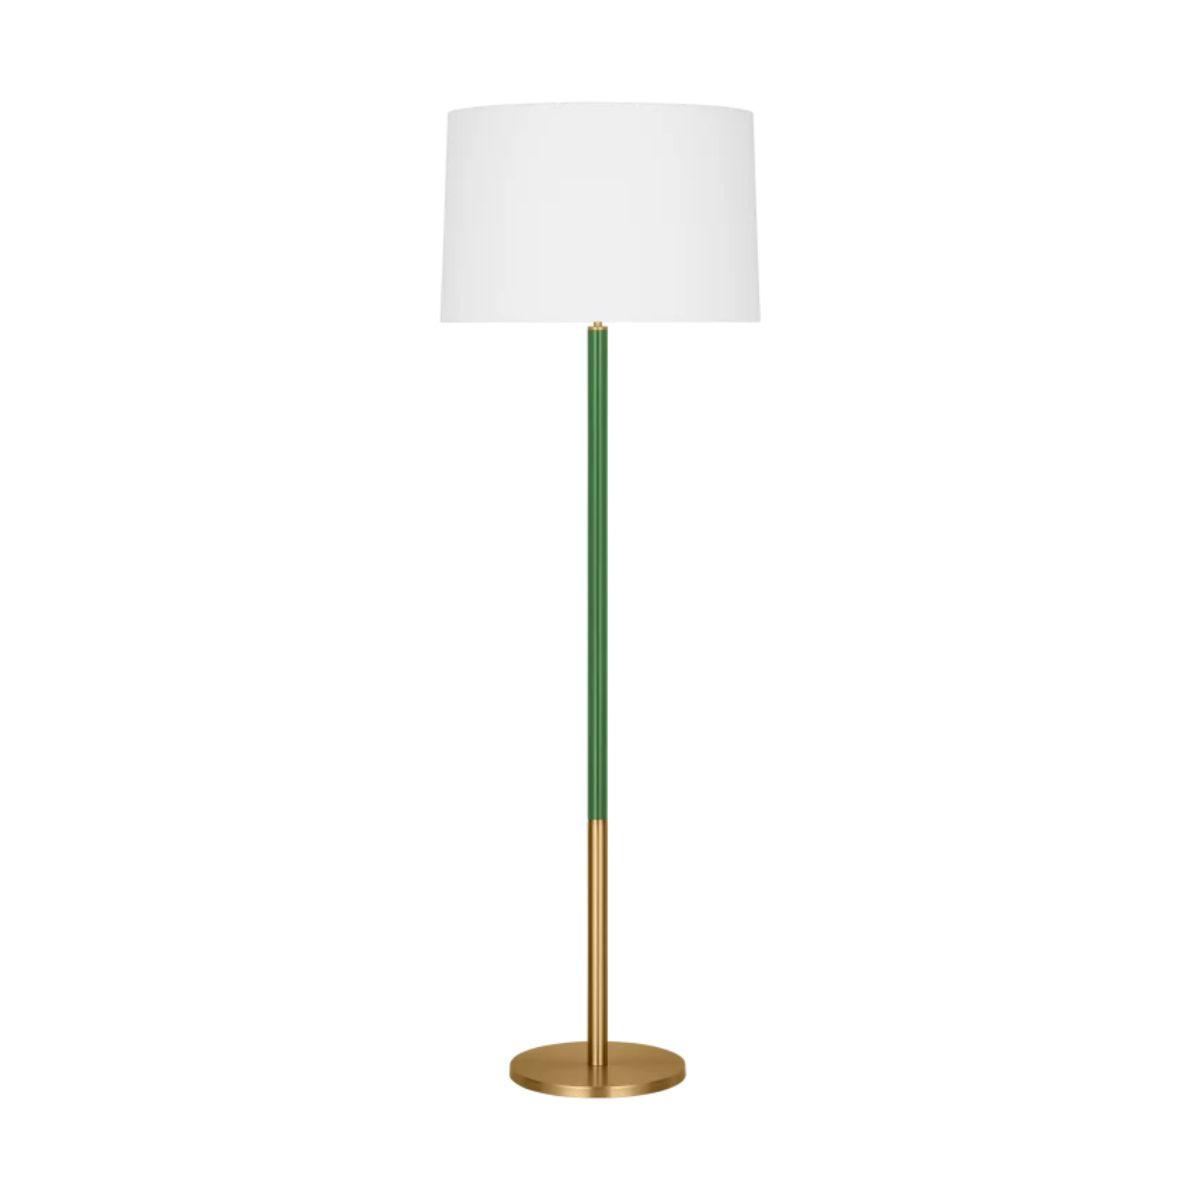 Monroe Large Floor Lamp with White Accents